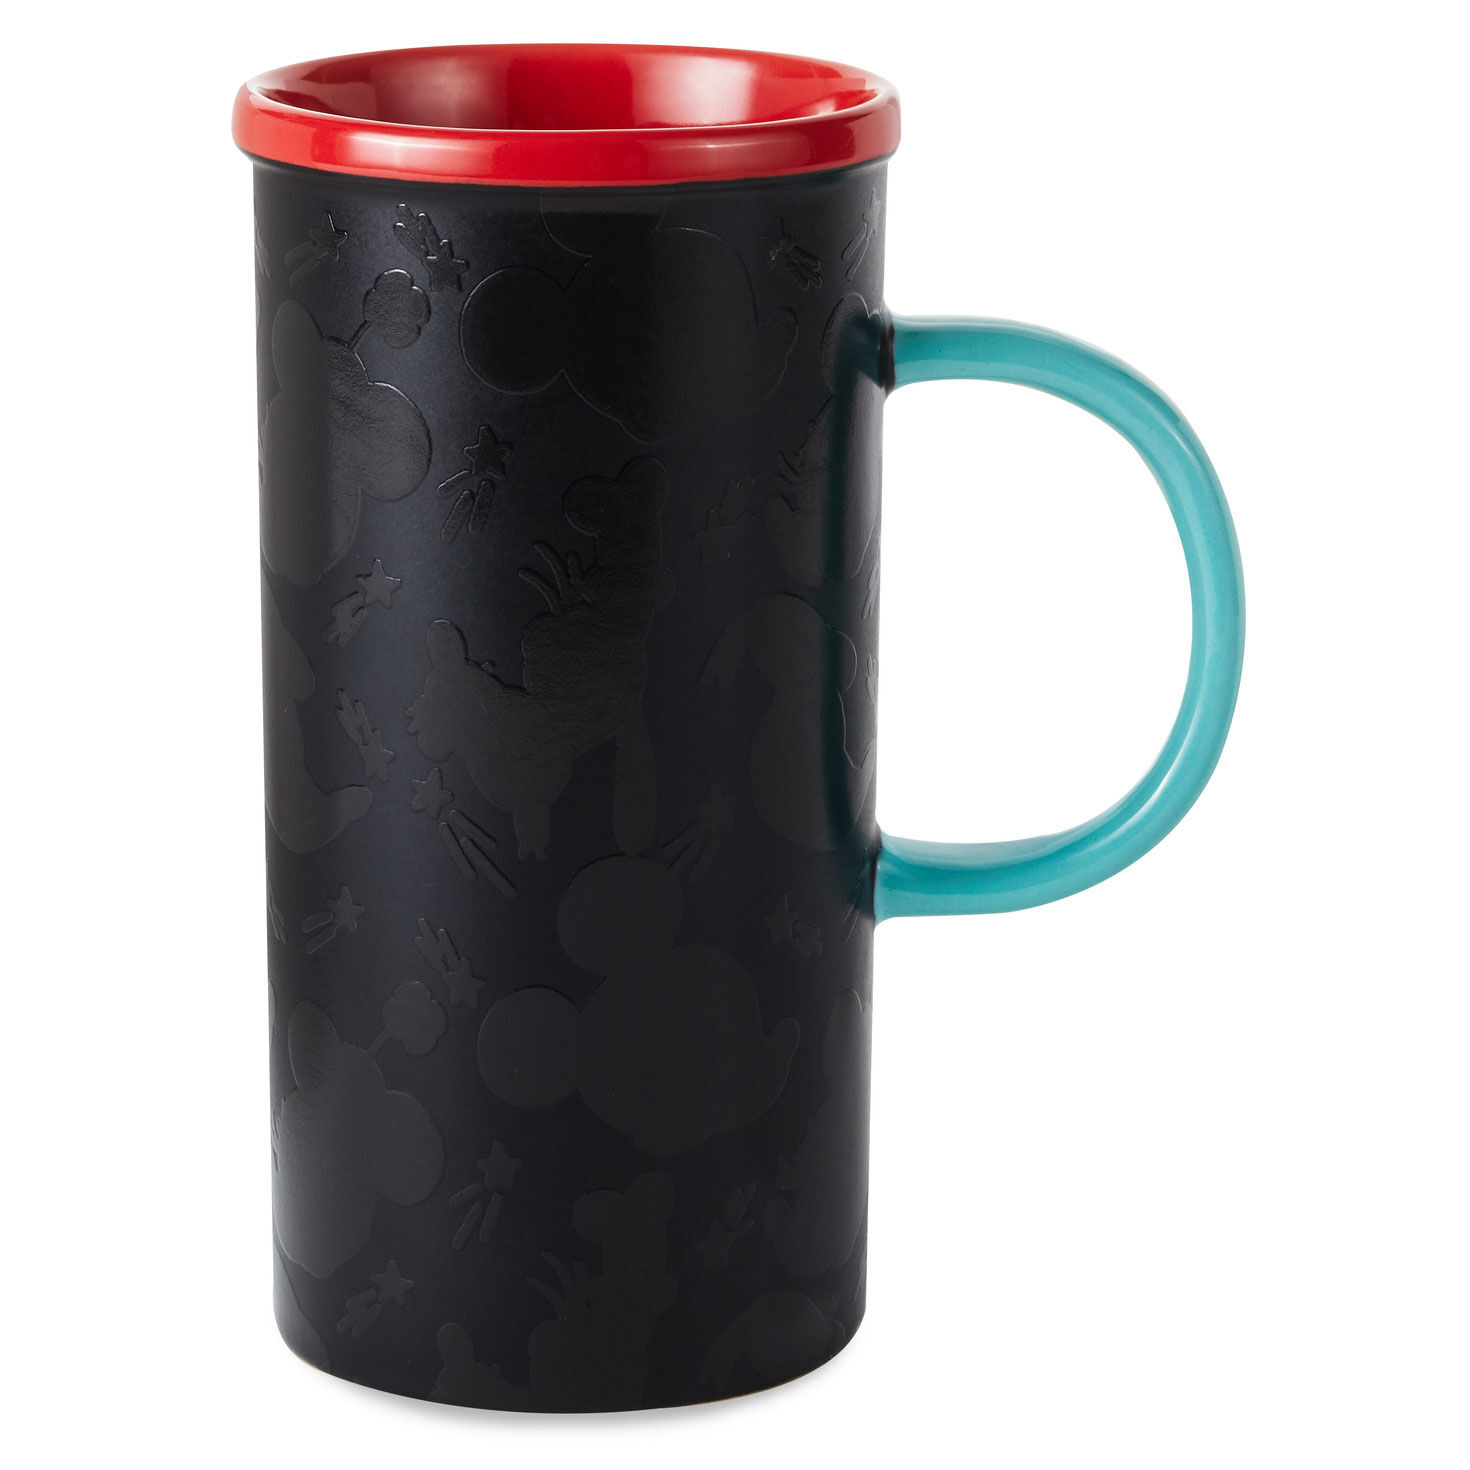 Disney Mickey Mouse and Friends Color-Changing Mug, 16 oz. for only USD 19.99 | Hallmark